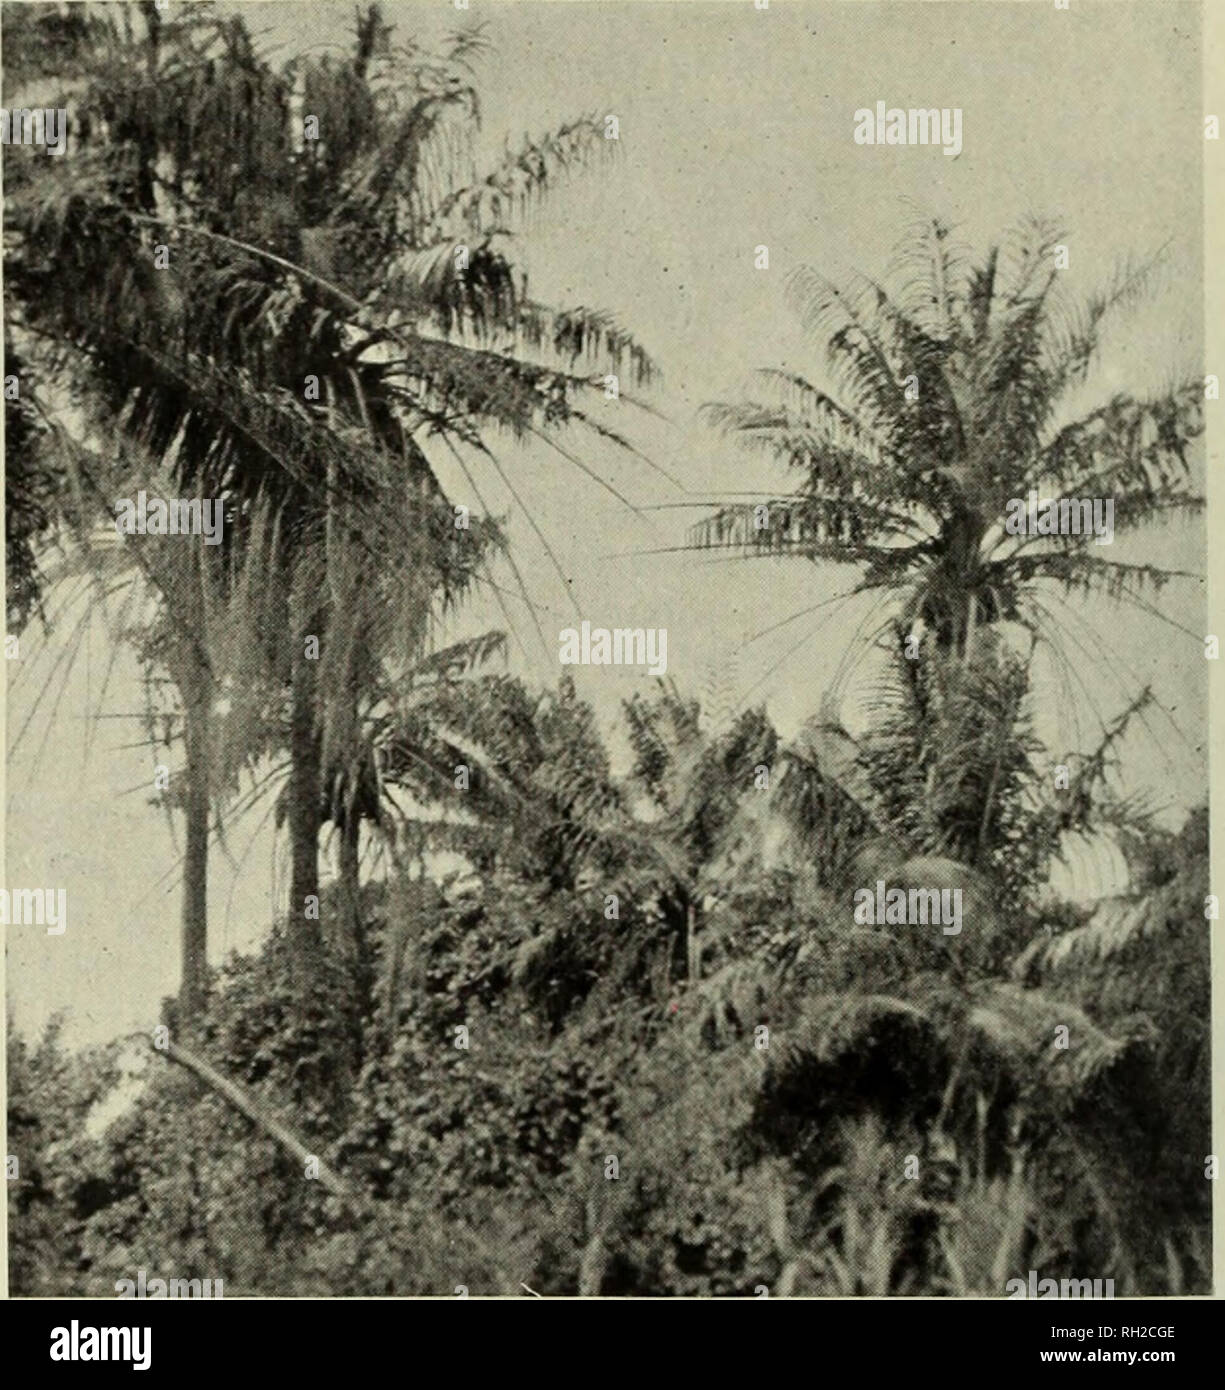 . British Central Africa; an attempt to give some account of a portion of the territories under British influence north of the Zambezi. Natural history. 212 BRITISH CENTRAL AFRICA. OIL PALMS, NEAR THE SONGWE RIVER, NORTH NYASA Then there are the numerous Coreopses (relations of the Sunflower)—golden- yellow, creamy-white, and blood - red ; pinkish-white anemones; purple iris (Aristed); rosy-tinted, salmon-tinted, apricot - tinted gladioli, or even a gladiolus with huge blossoms of a pale buff colour like cafd-au-lait. There is a great range in the colour of these gladioli. One has a flower of  Stock Photo